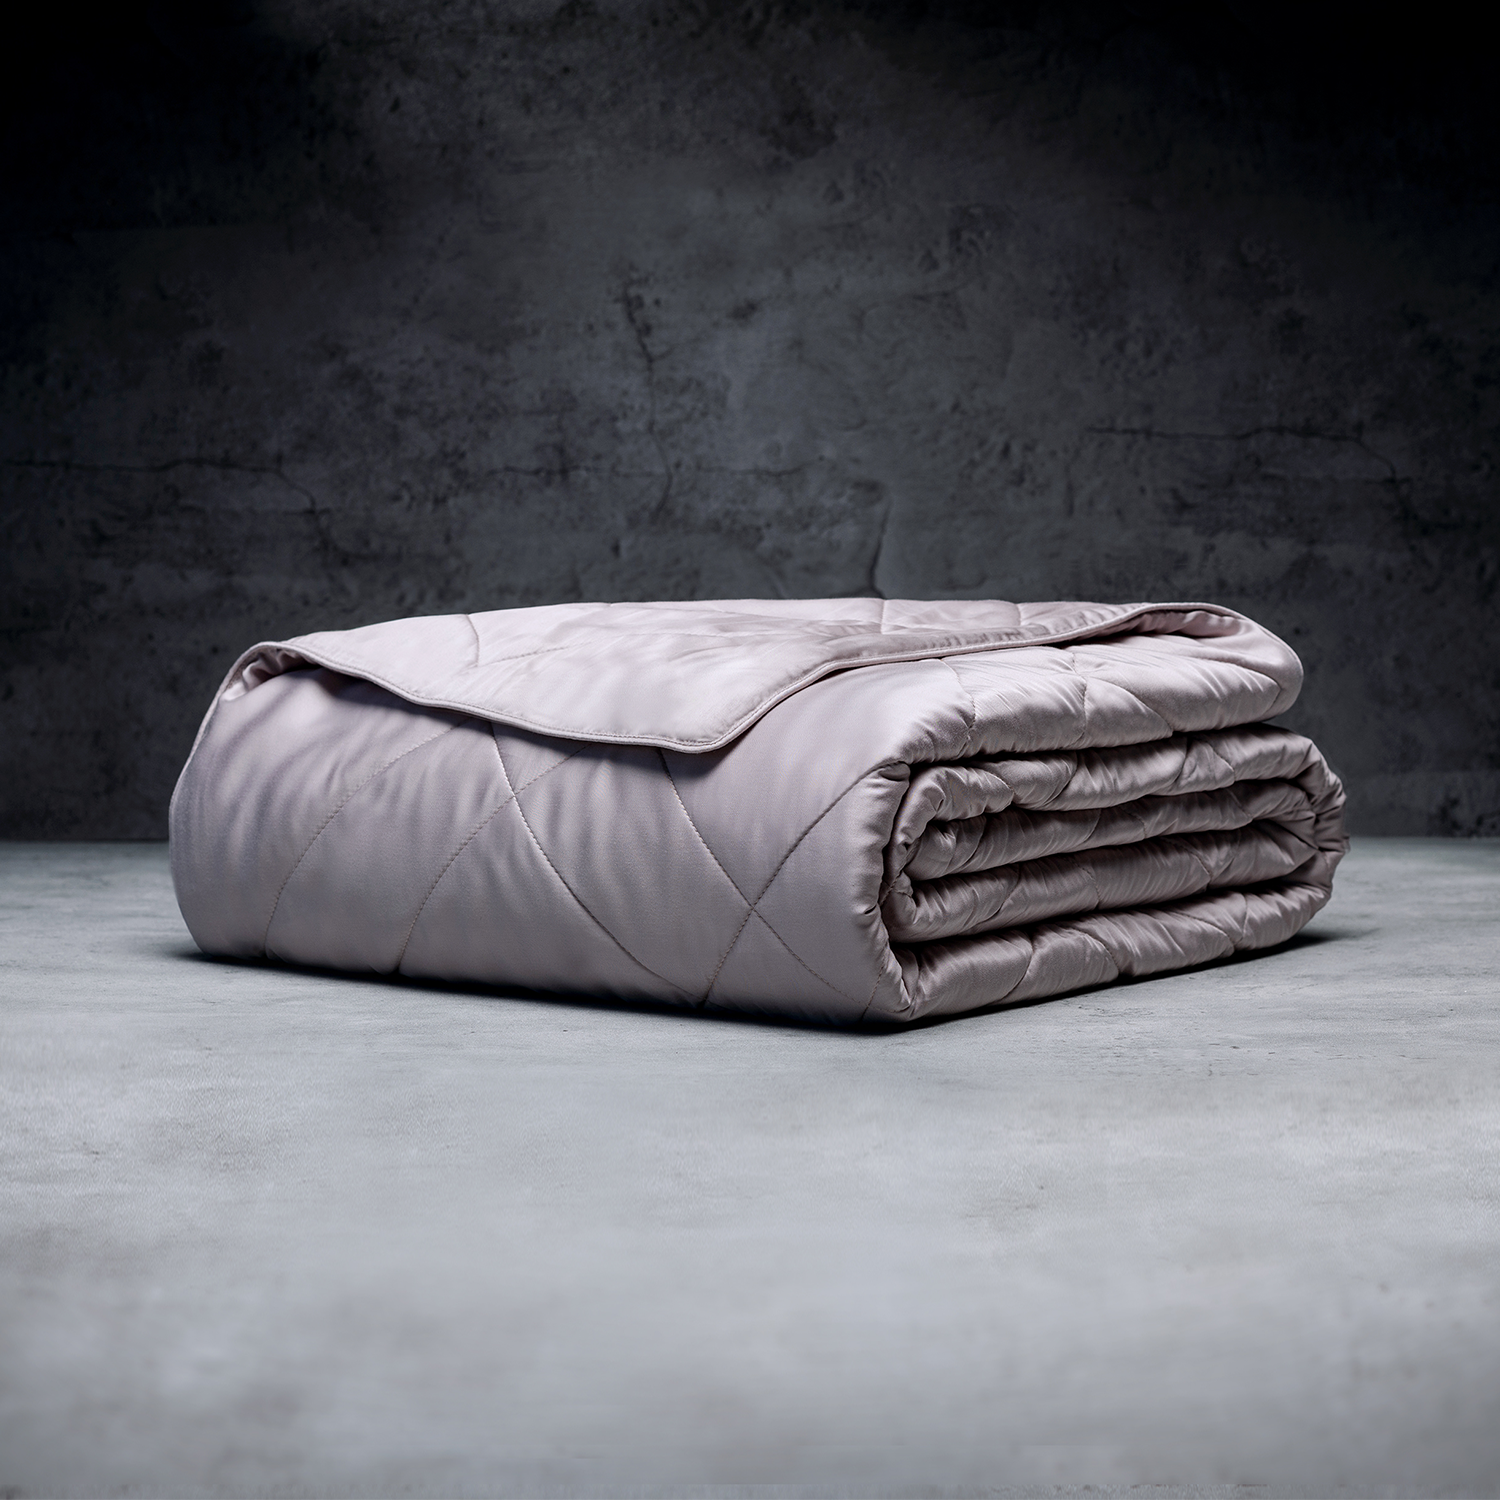 Luxury blanket DIAMANT made of 100% cashmere | 140x250cm | Black-and-white